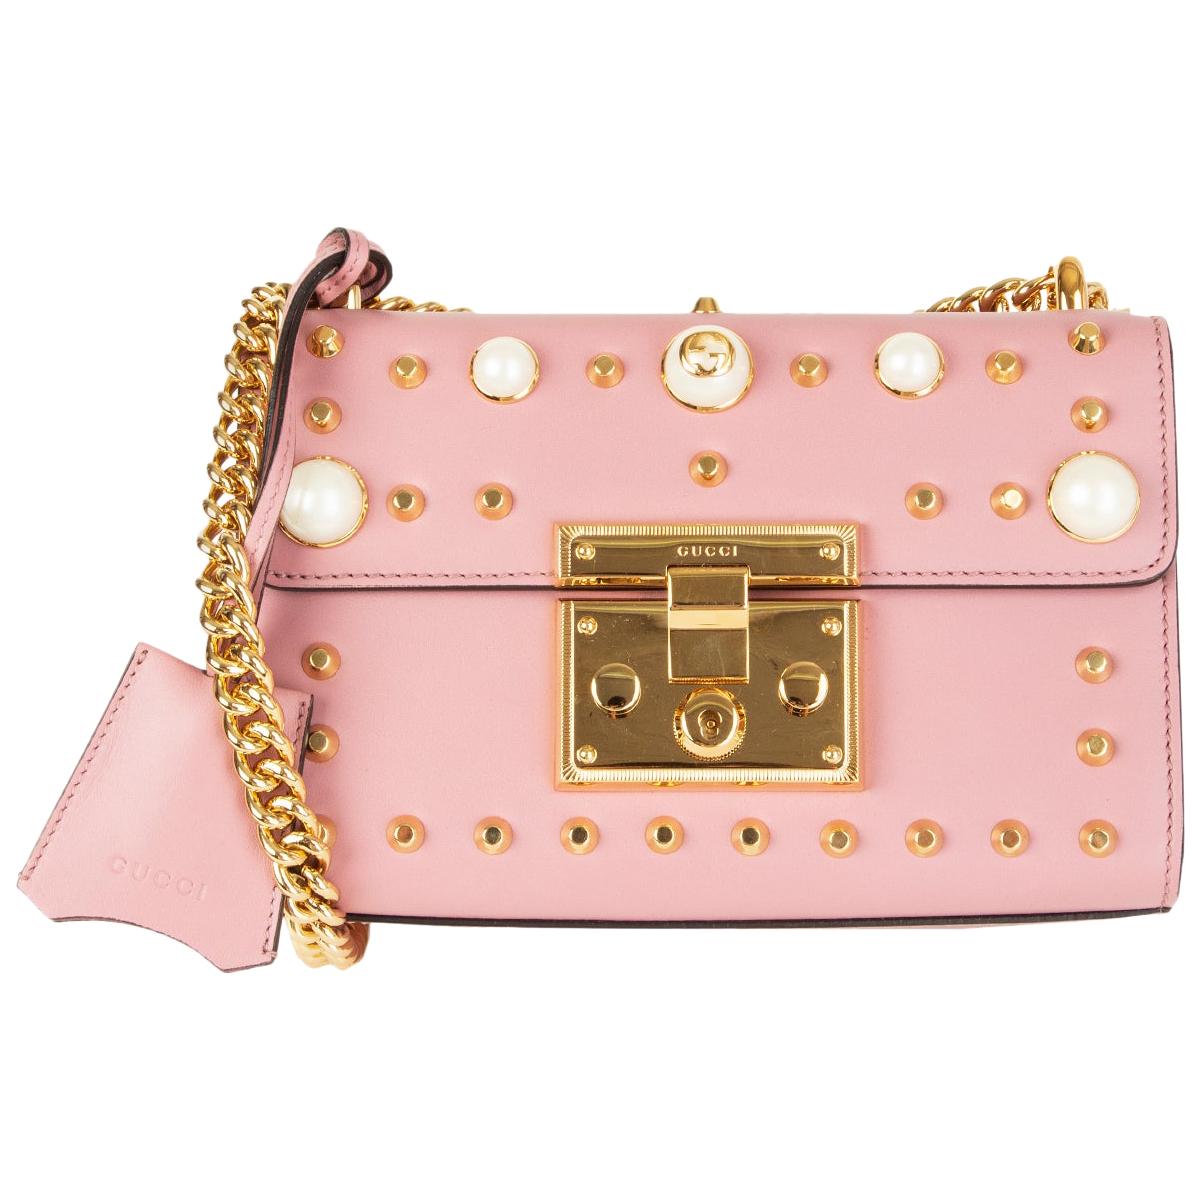 GUCCI pink leather PADLOCK SMALL PEARL STUDDED Shoulder Bag